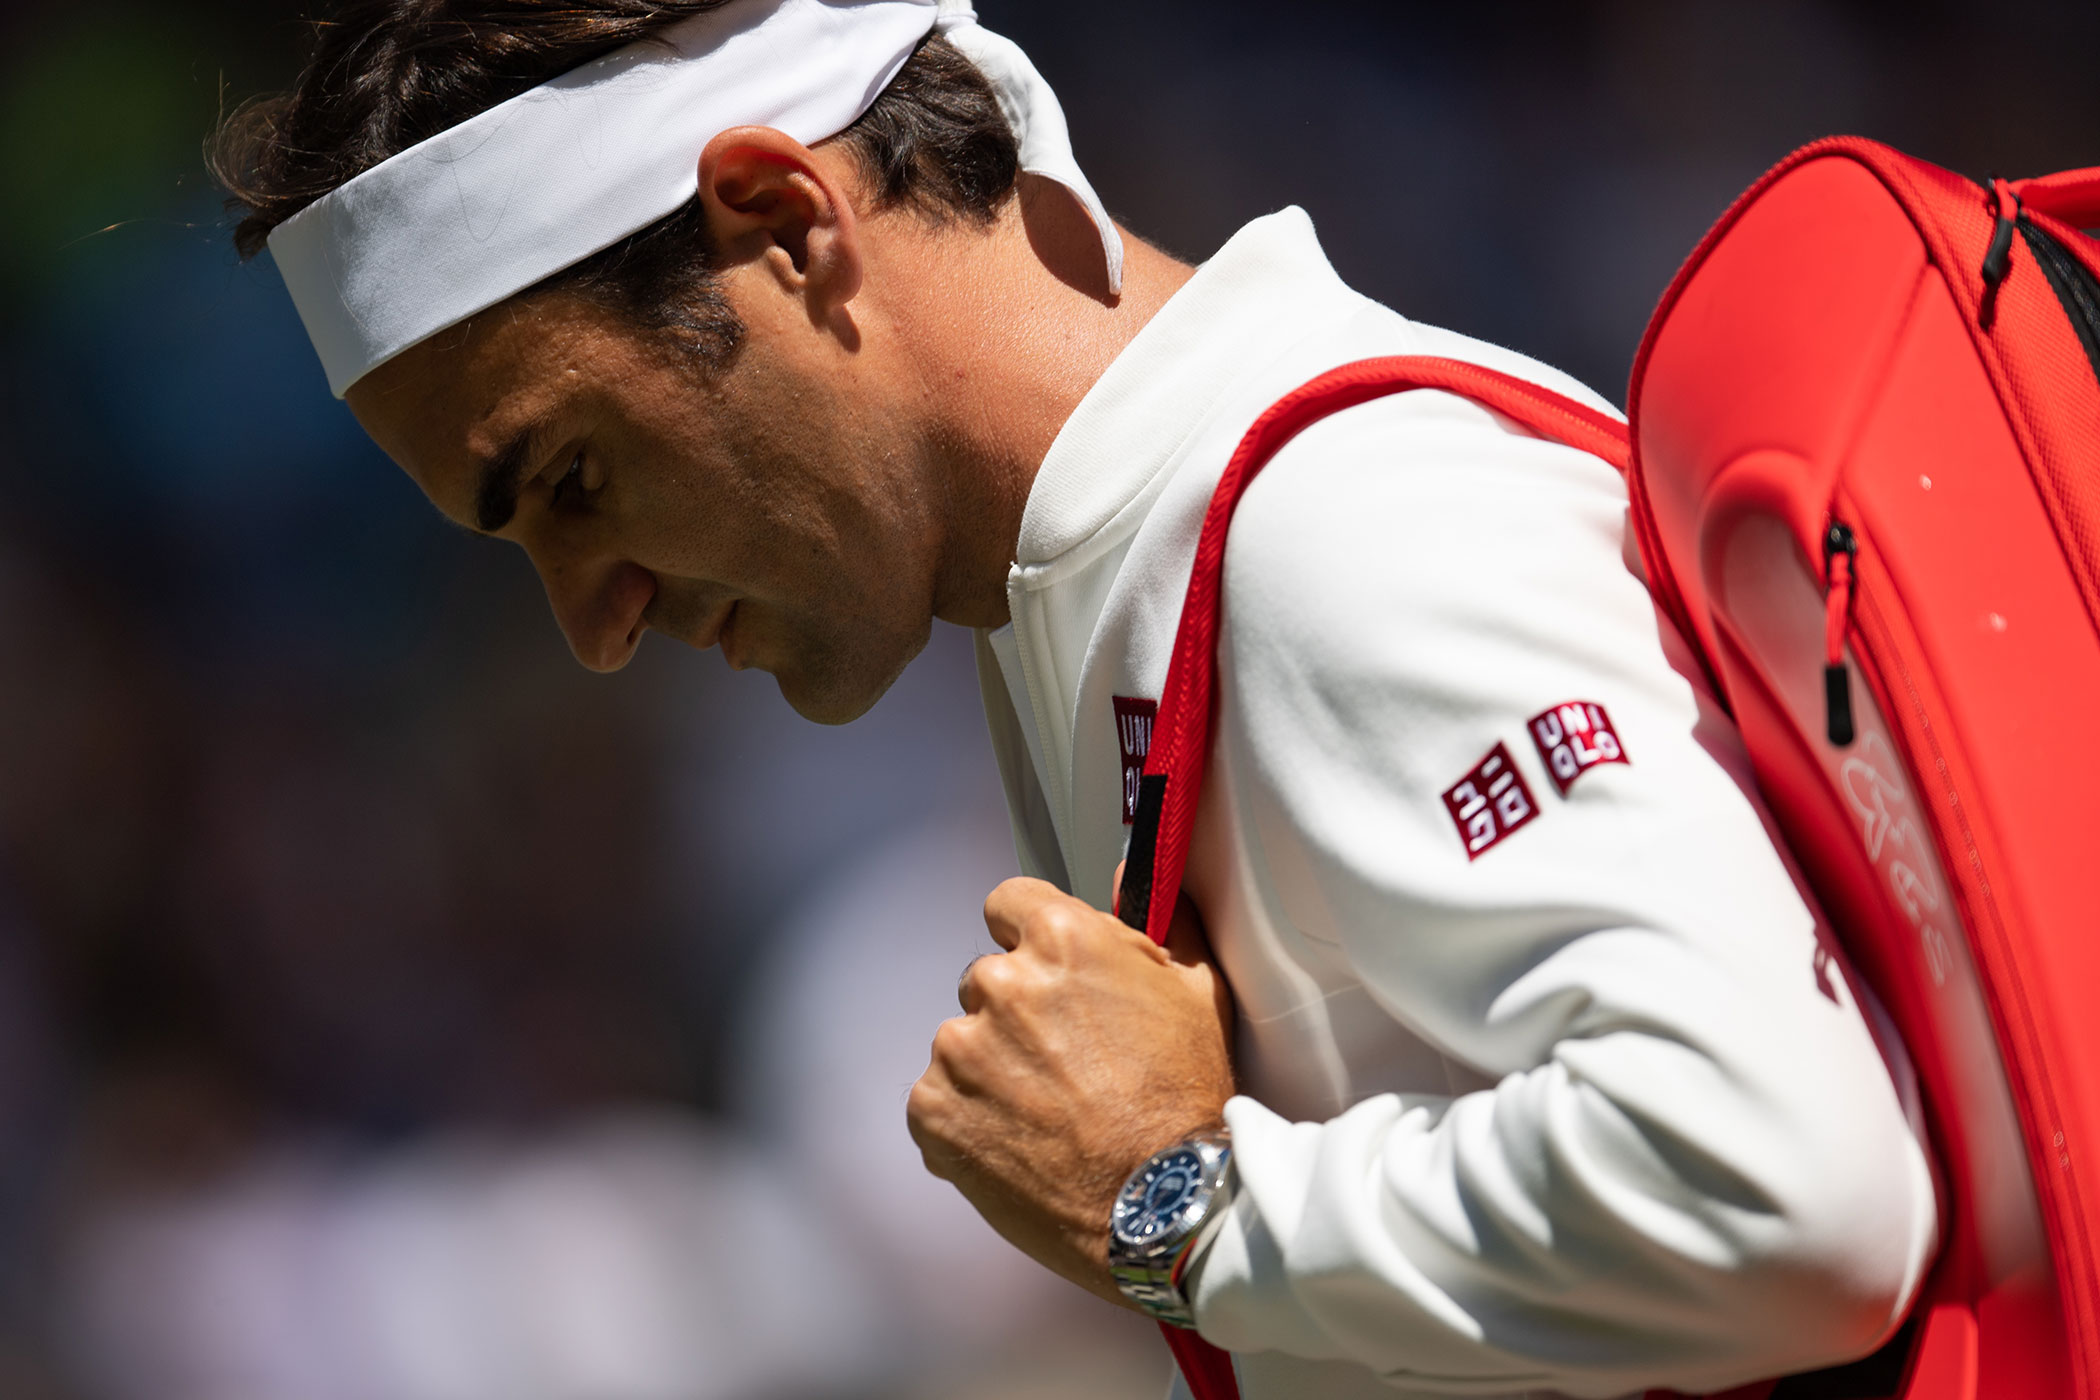 Watch Spotting: Roger Federer looking very polished in the brand new @rolex  1908, plus more of our picks for some of the best watches fro... | Instagram